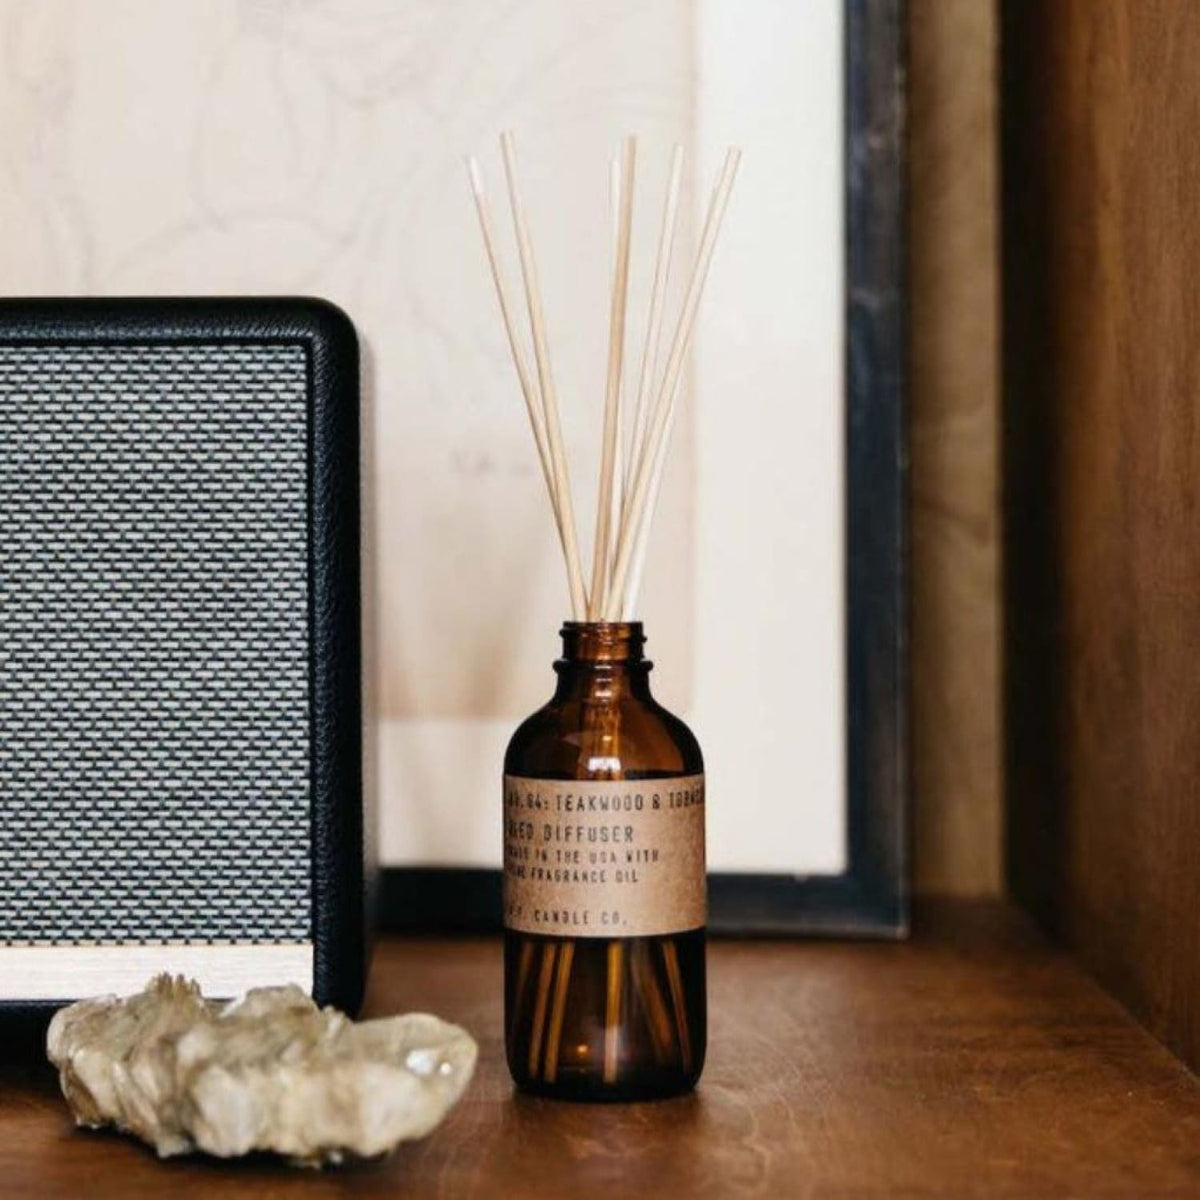 Nag Champa Indian Incense  Incense, Room Sprays, Candles @ FriendsNYC